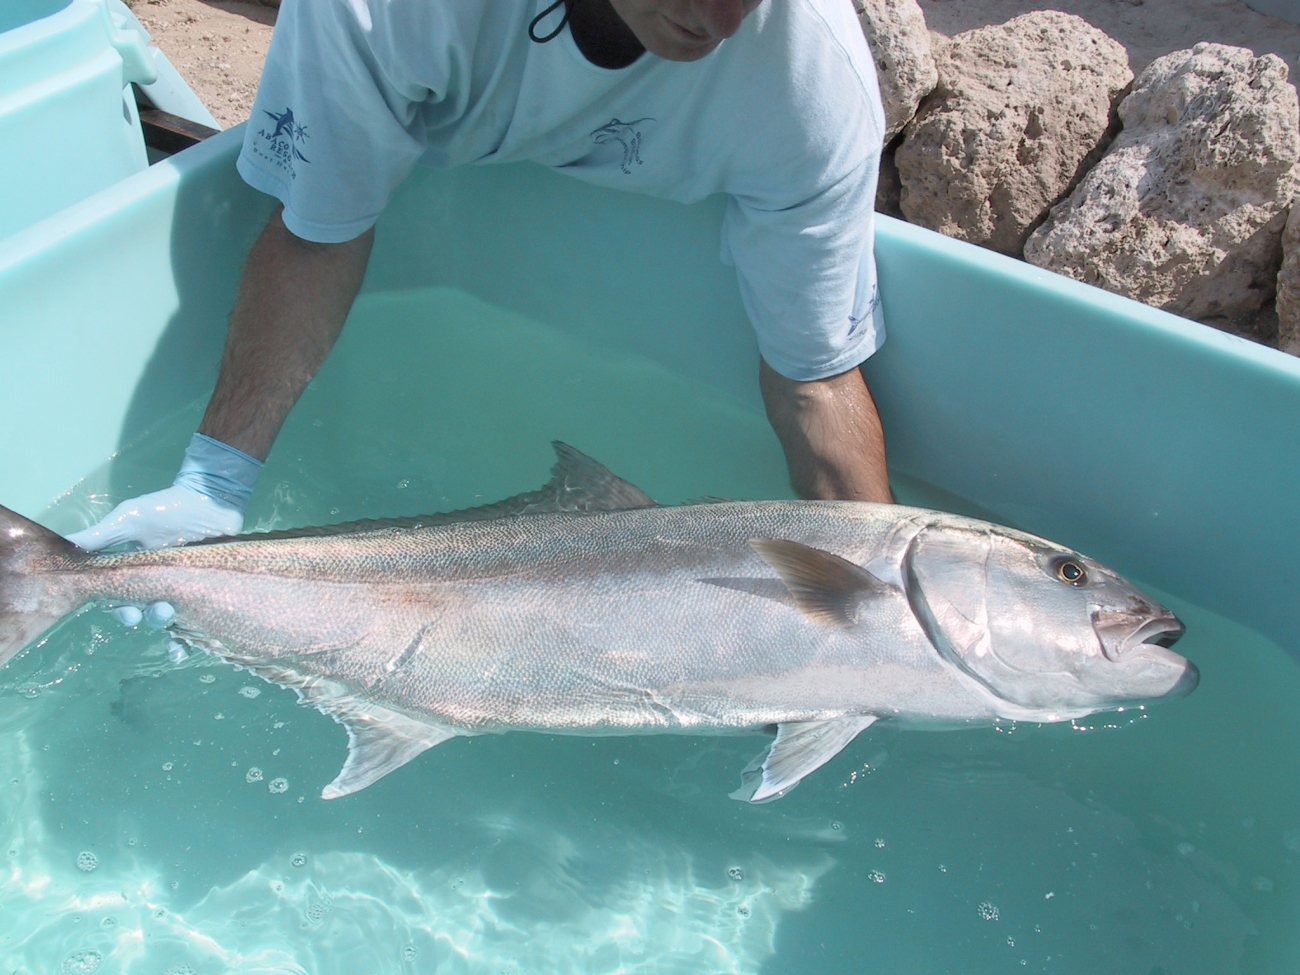 Amberjack broodstock upon arrival at the University of Miami aquaculturereasearch laboratory in the Florida KeysRosenstiel School of Marine and Atmospheric Science